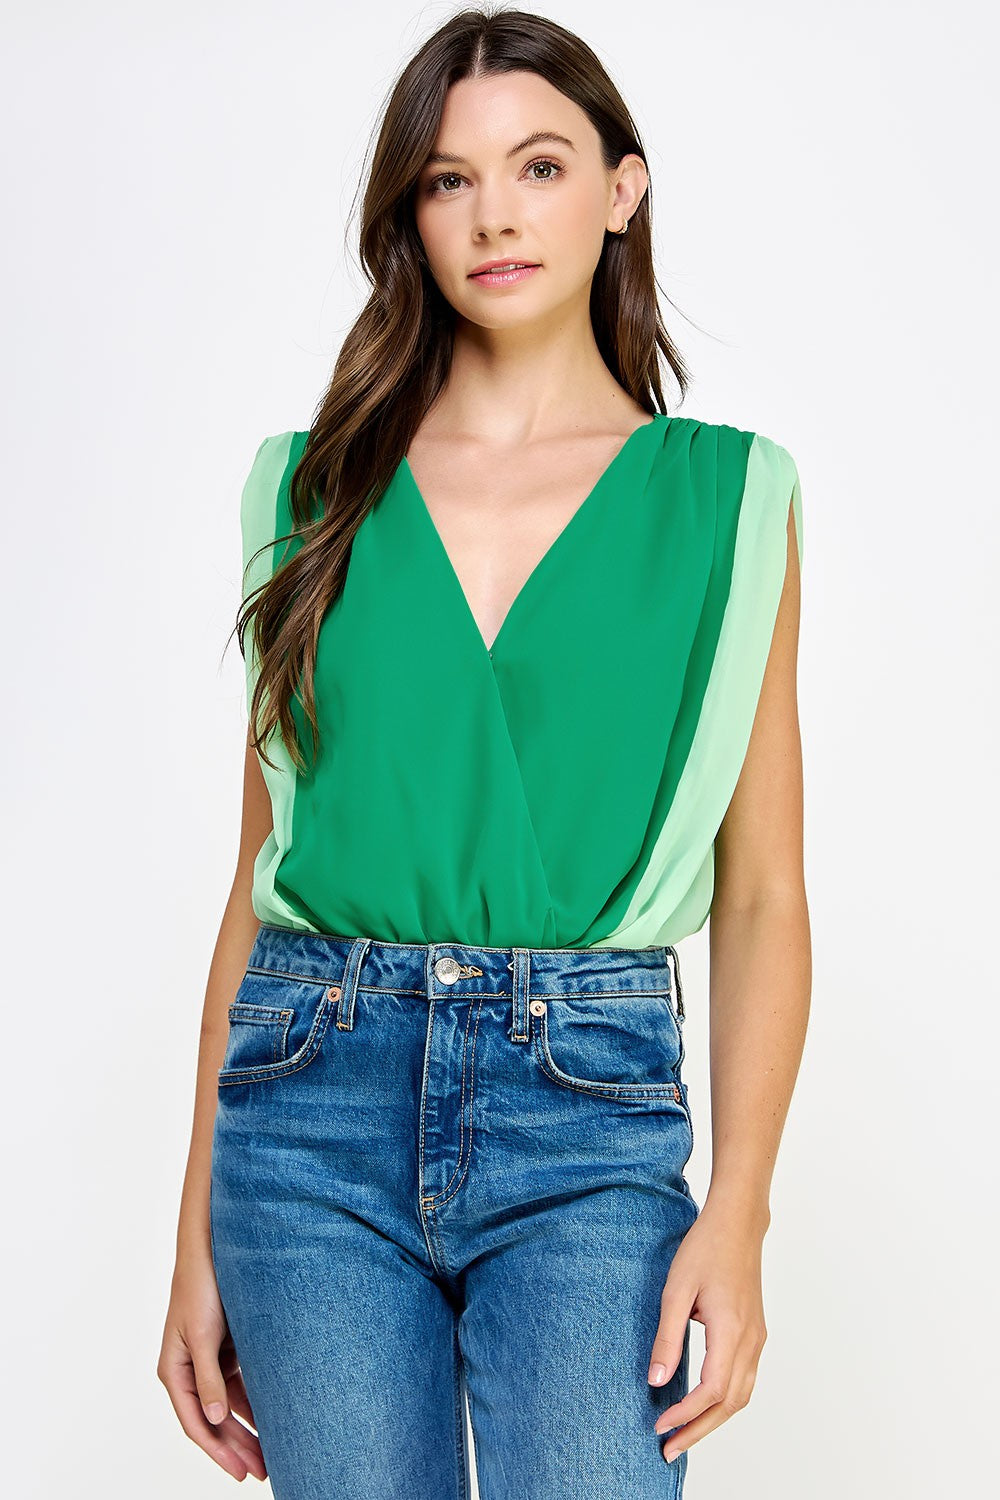 LOOKING FOR A SIGN EMERALD MIX BODYSUIT